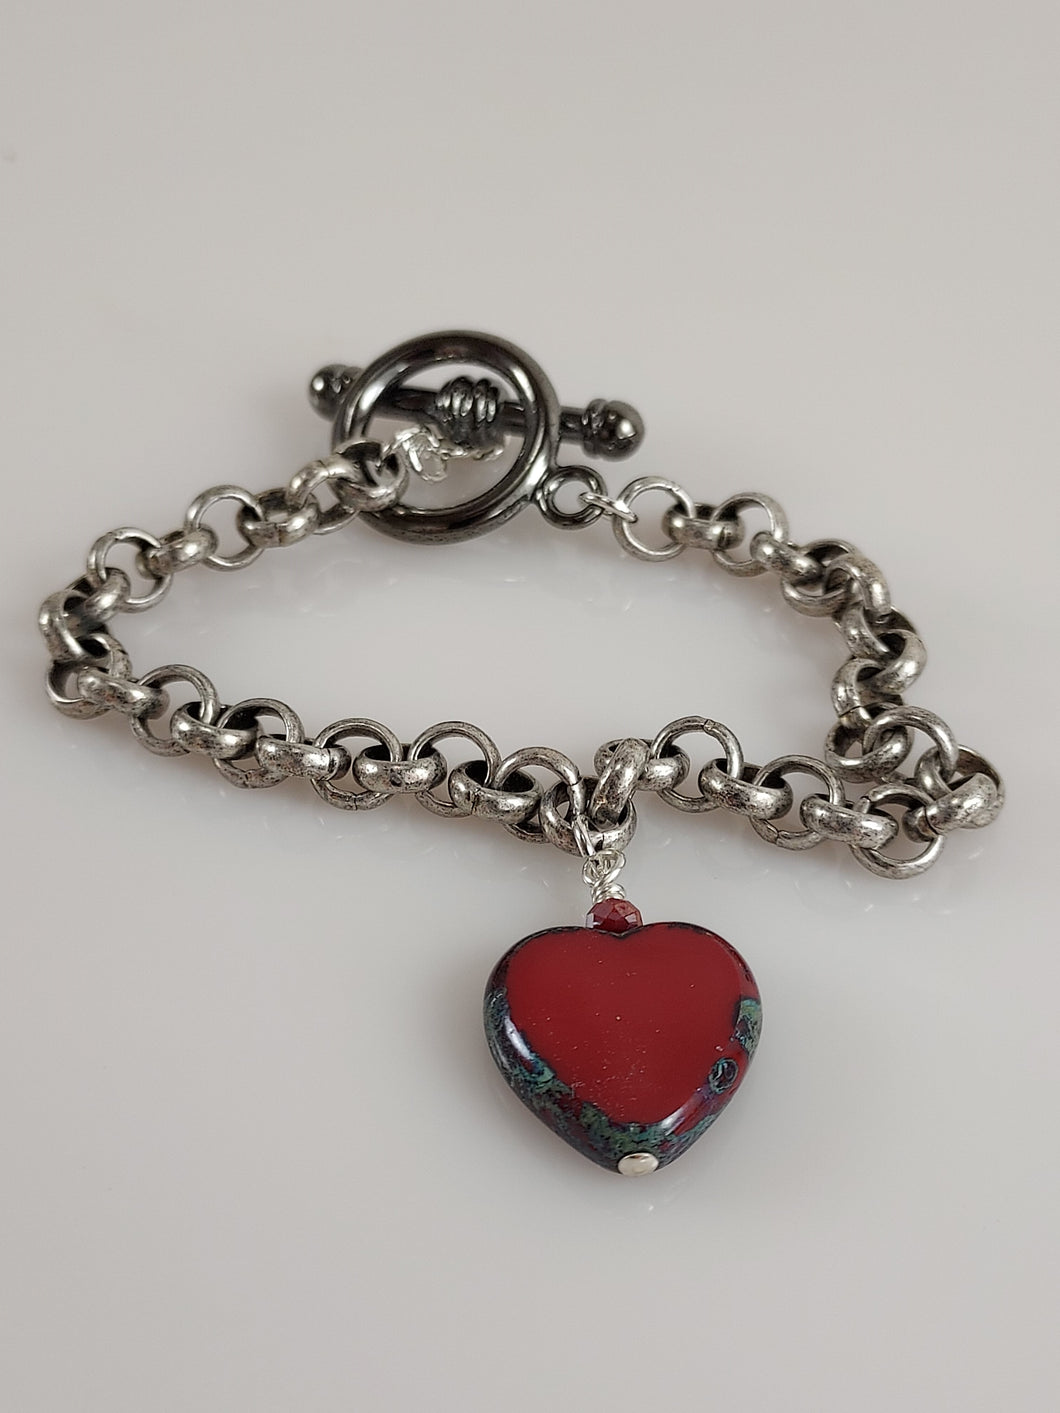 Silver chain and heart bracelet handcrafted in California.